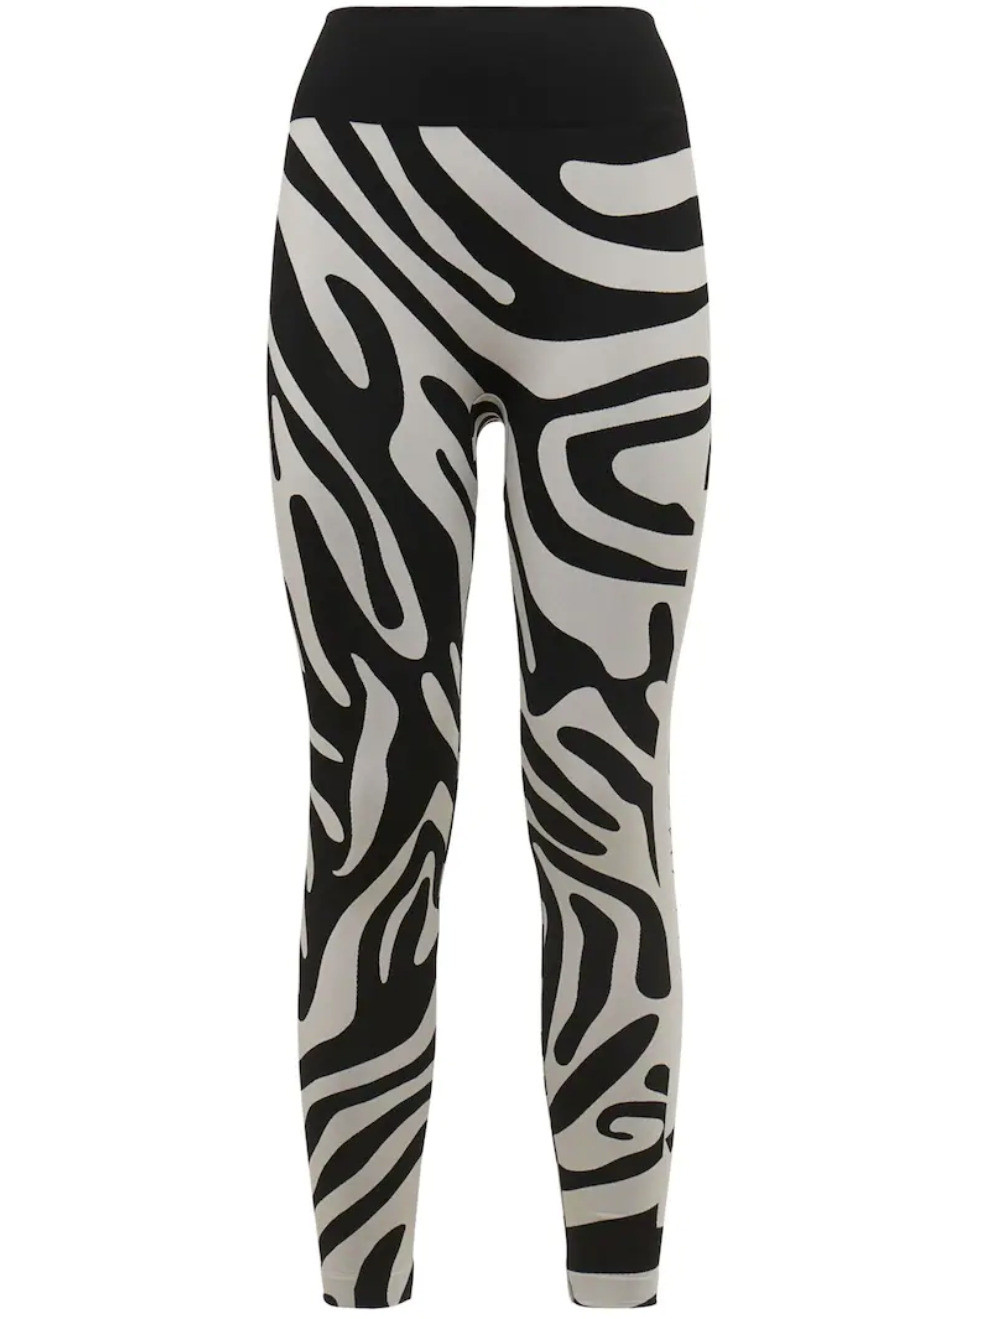 Leggings tight adidas by Stella McCartney Agent of Kindness x Wolford Knit, Nero, large image number 0